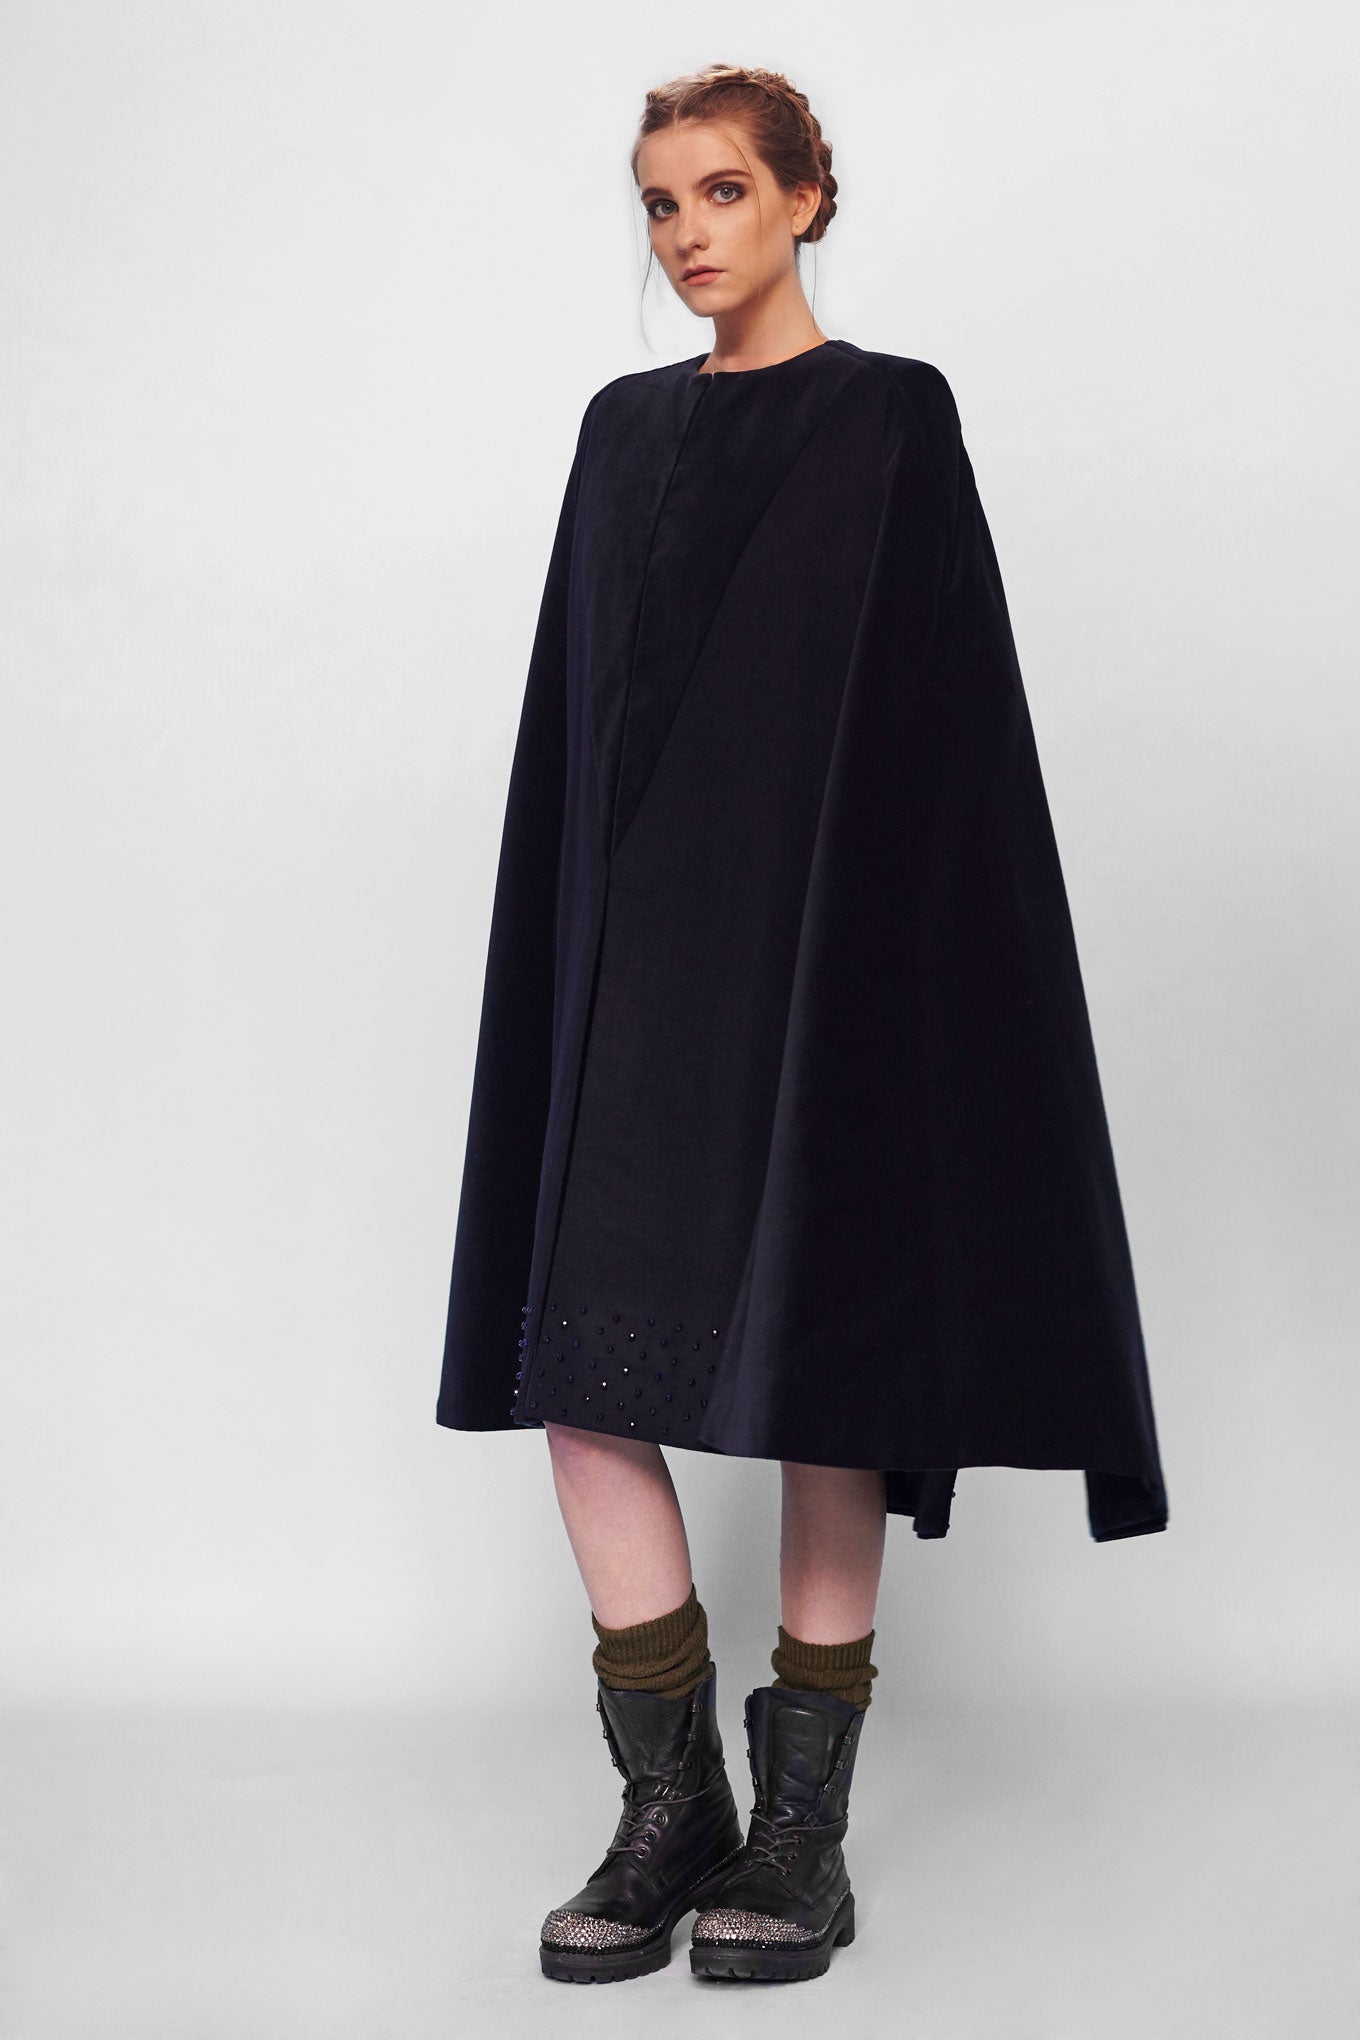 VILMA embroidered wool cape - Navy